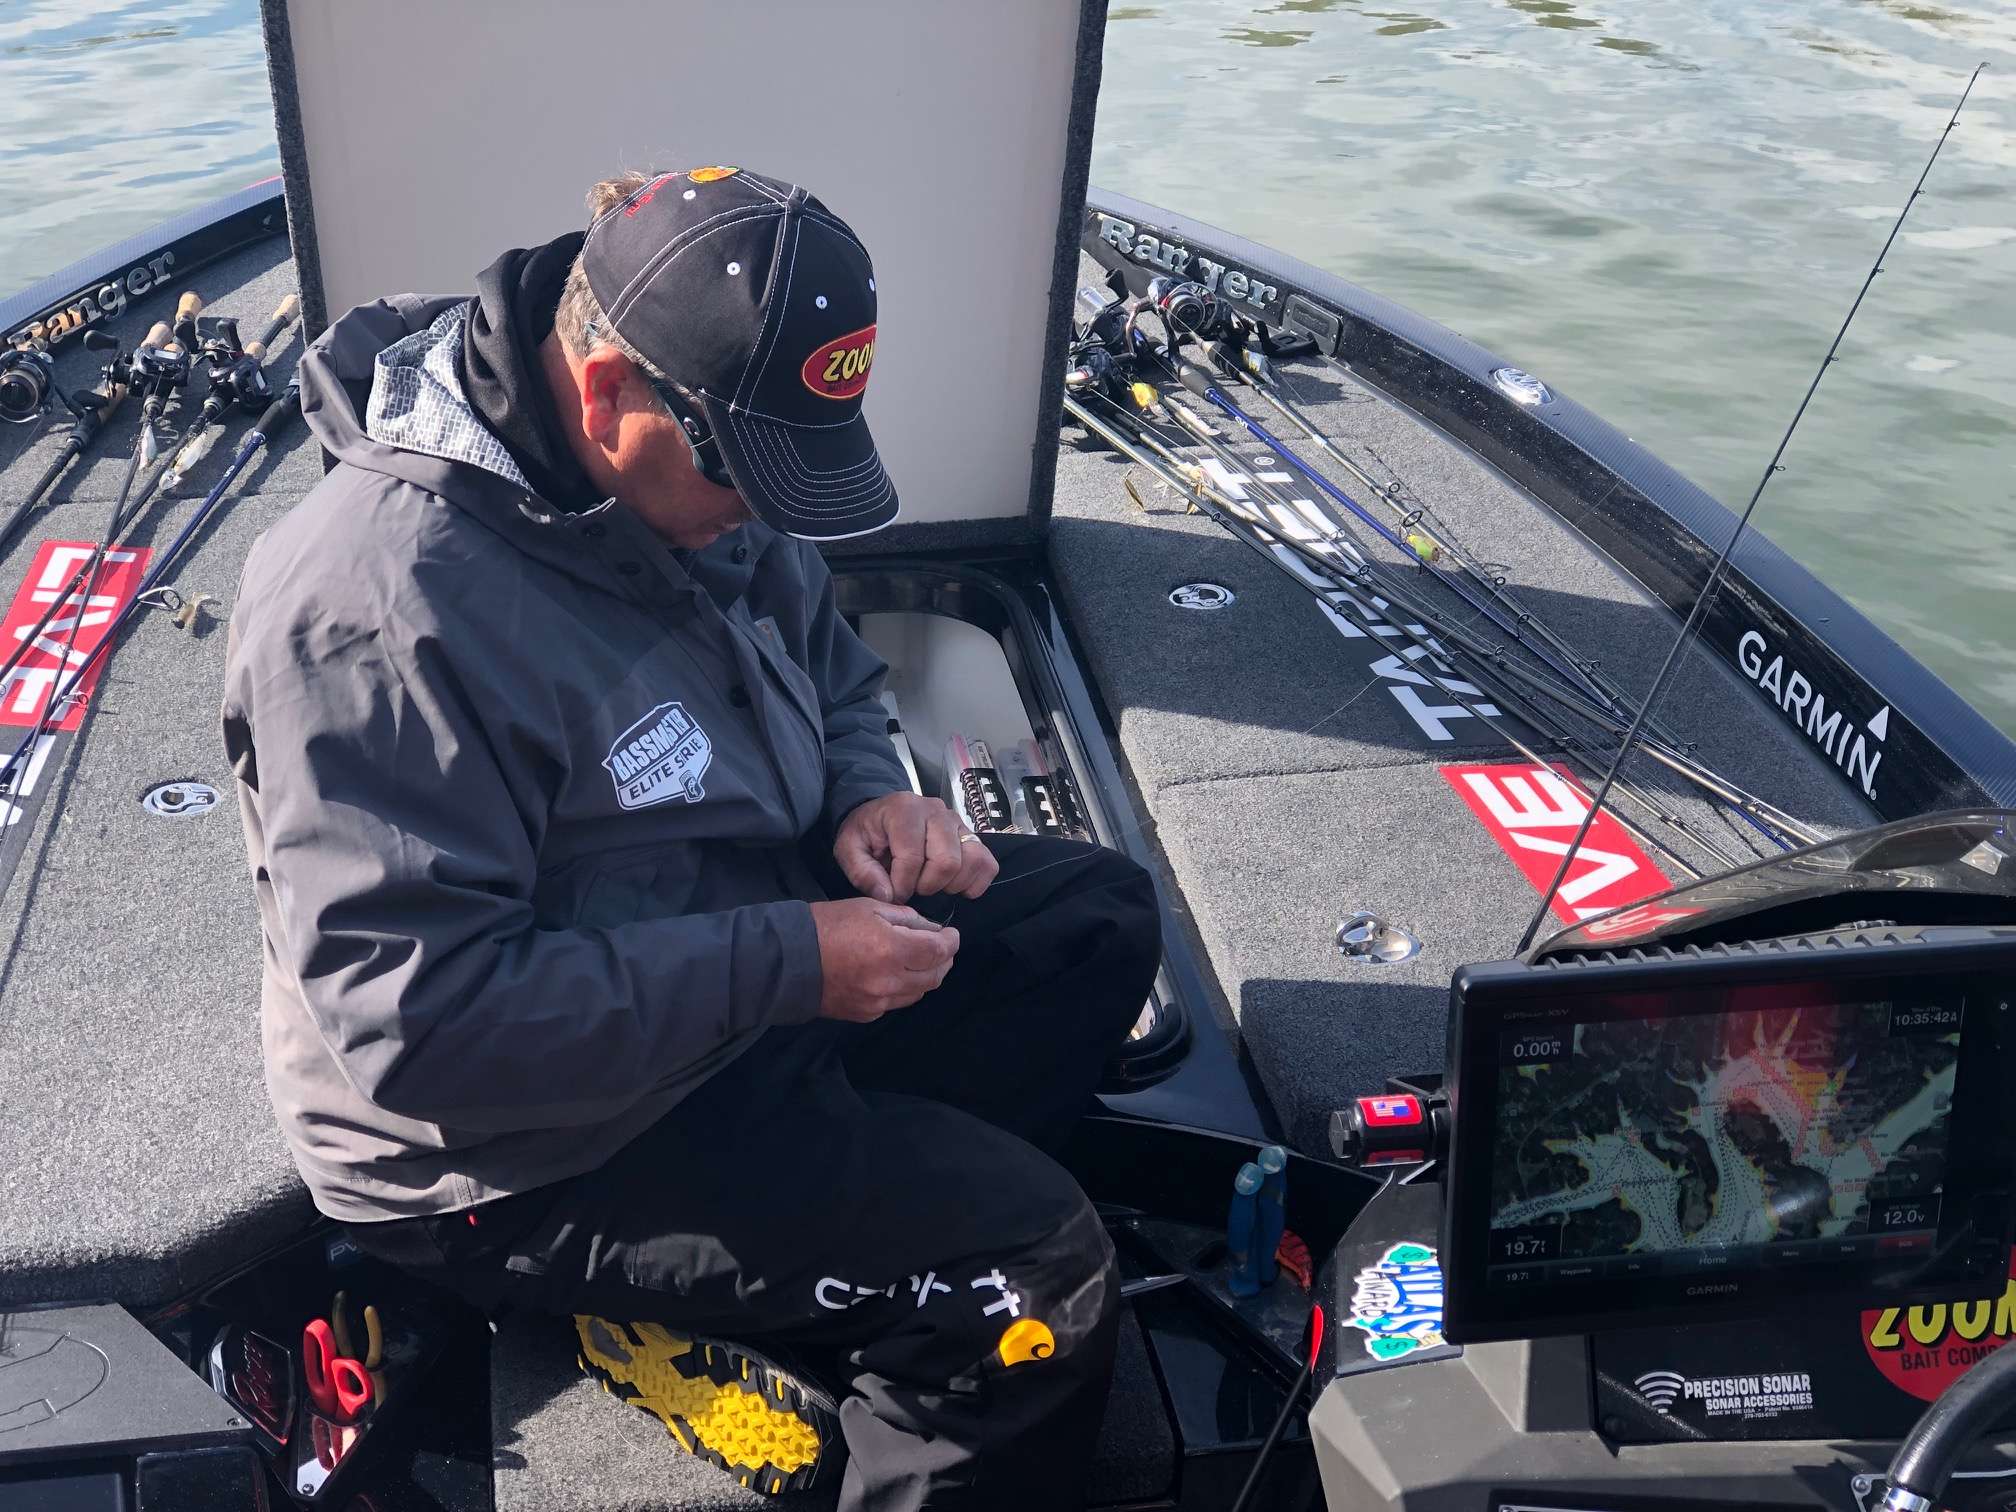 After having his crankbait destroyed by an aggressive strike that literally snapped his lure in half, Todd Auten, a three time Bassmaster Classic qualifier, digs out another and gets back to work. 

âThat kind of stuff just seems to happen to me,â said Auten. 